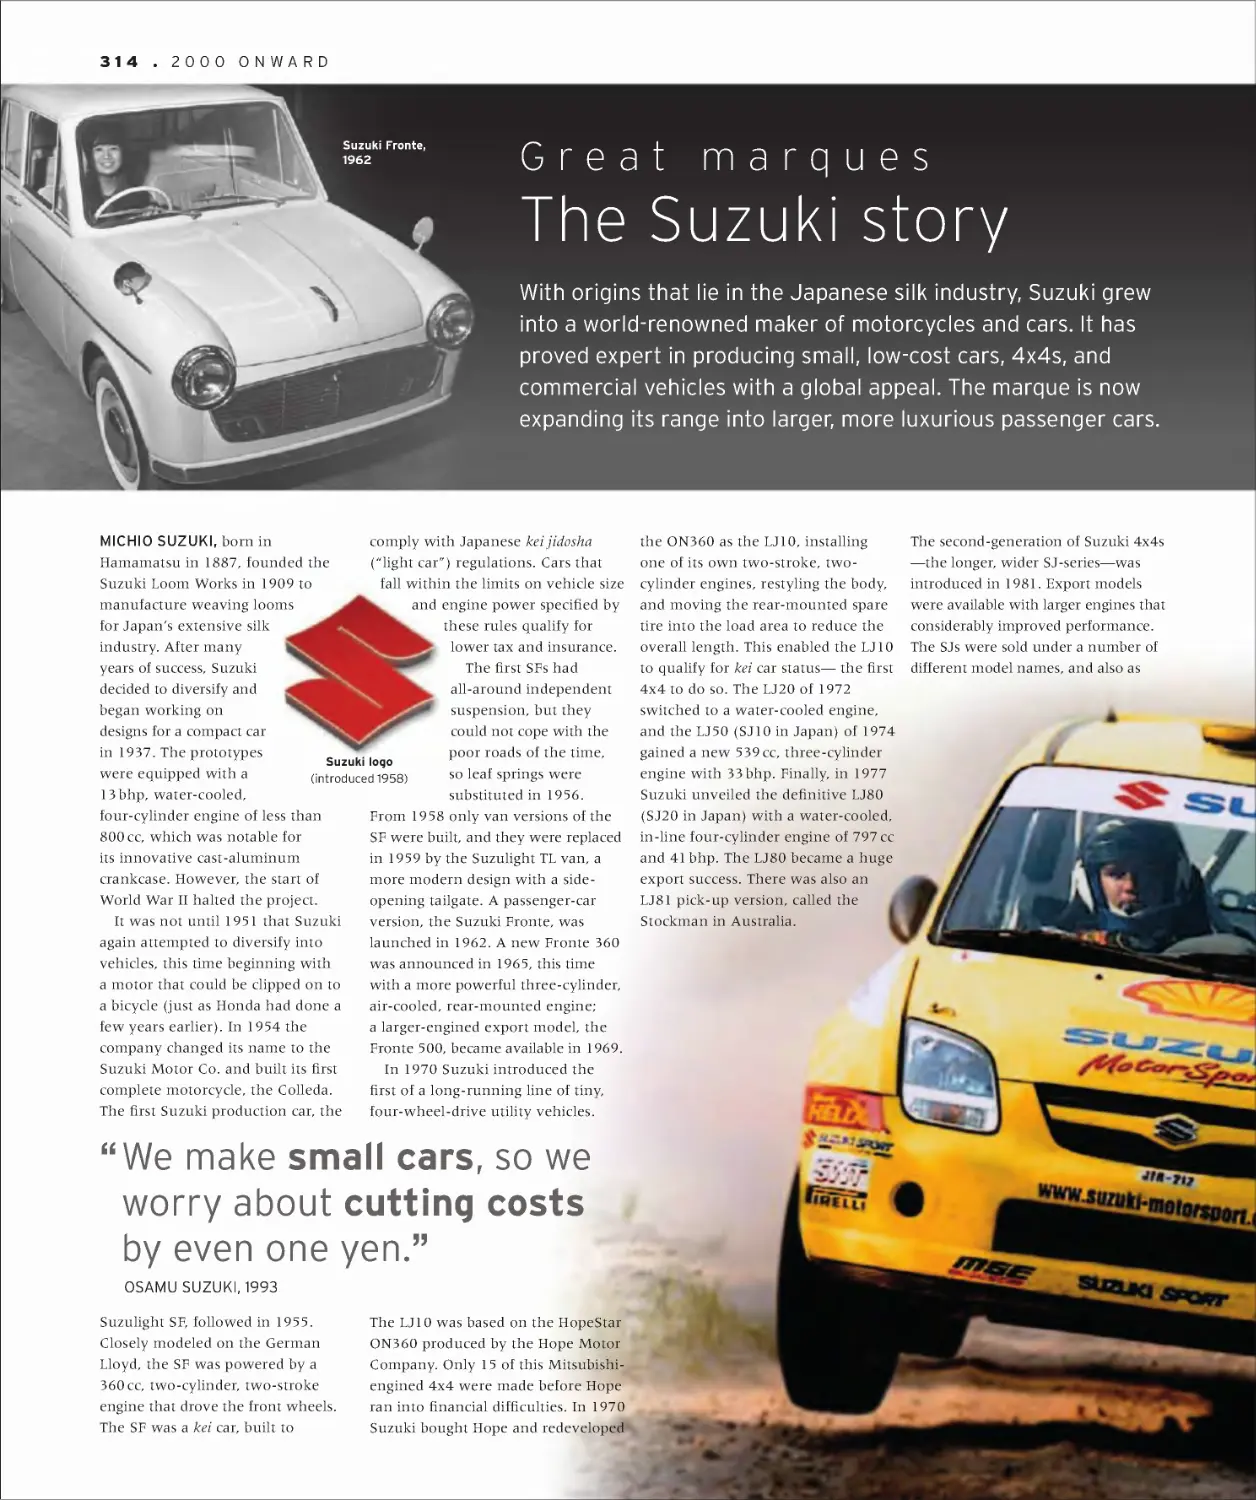 Great marques: The Suzuki story 314